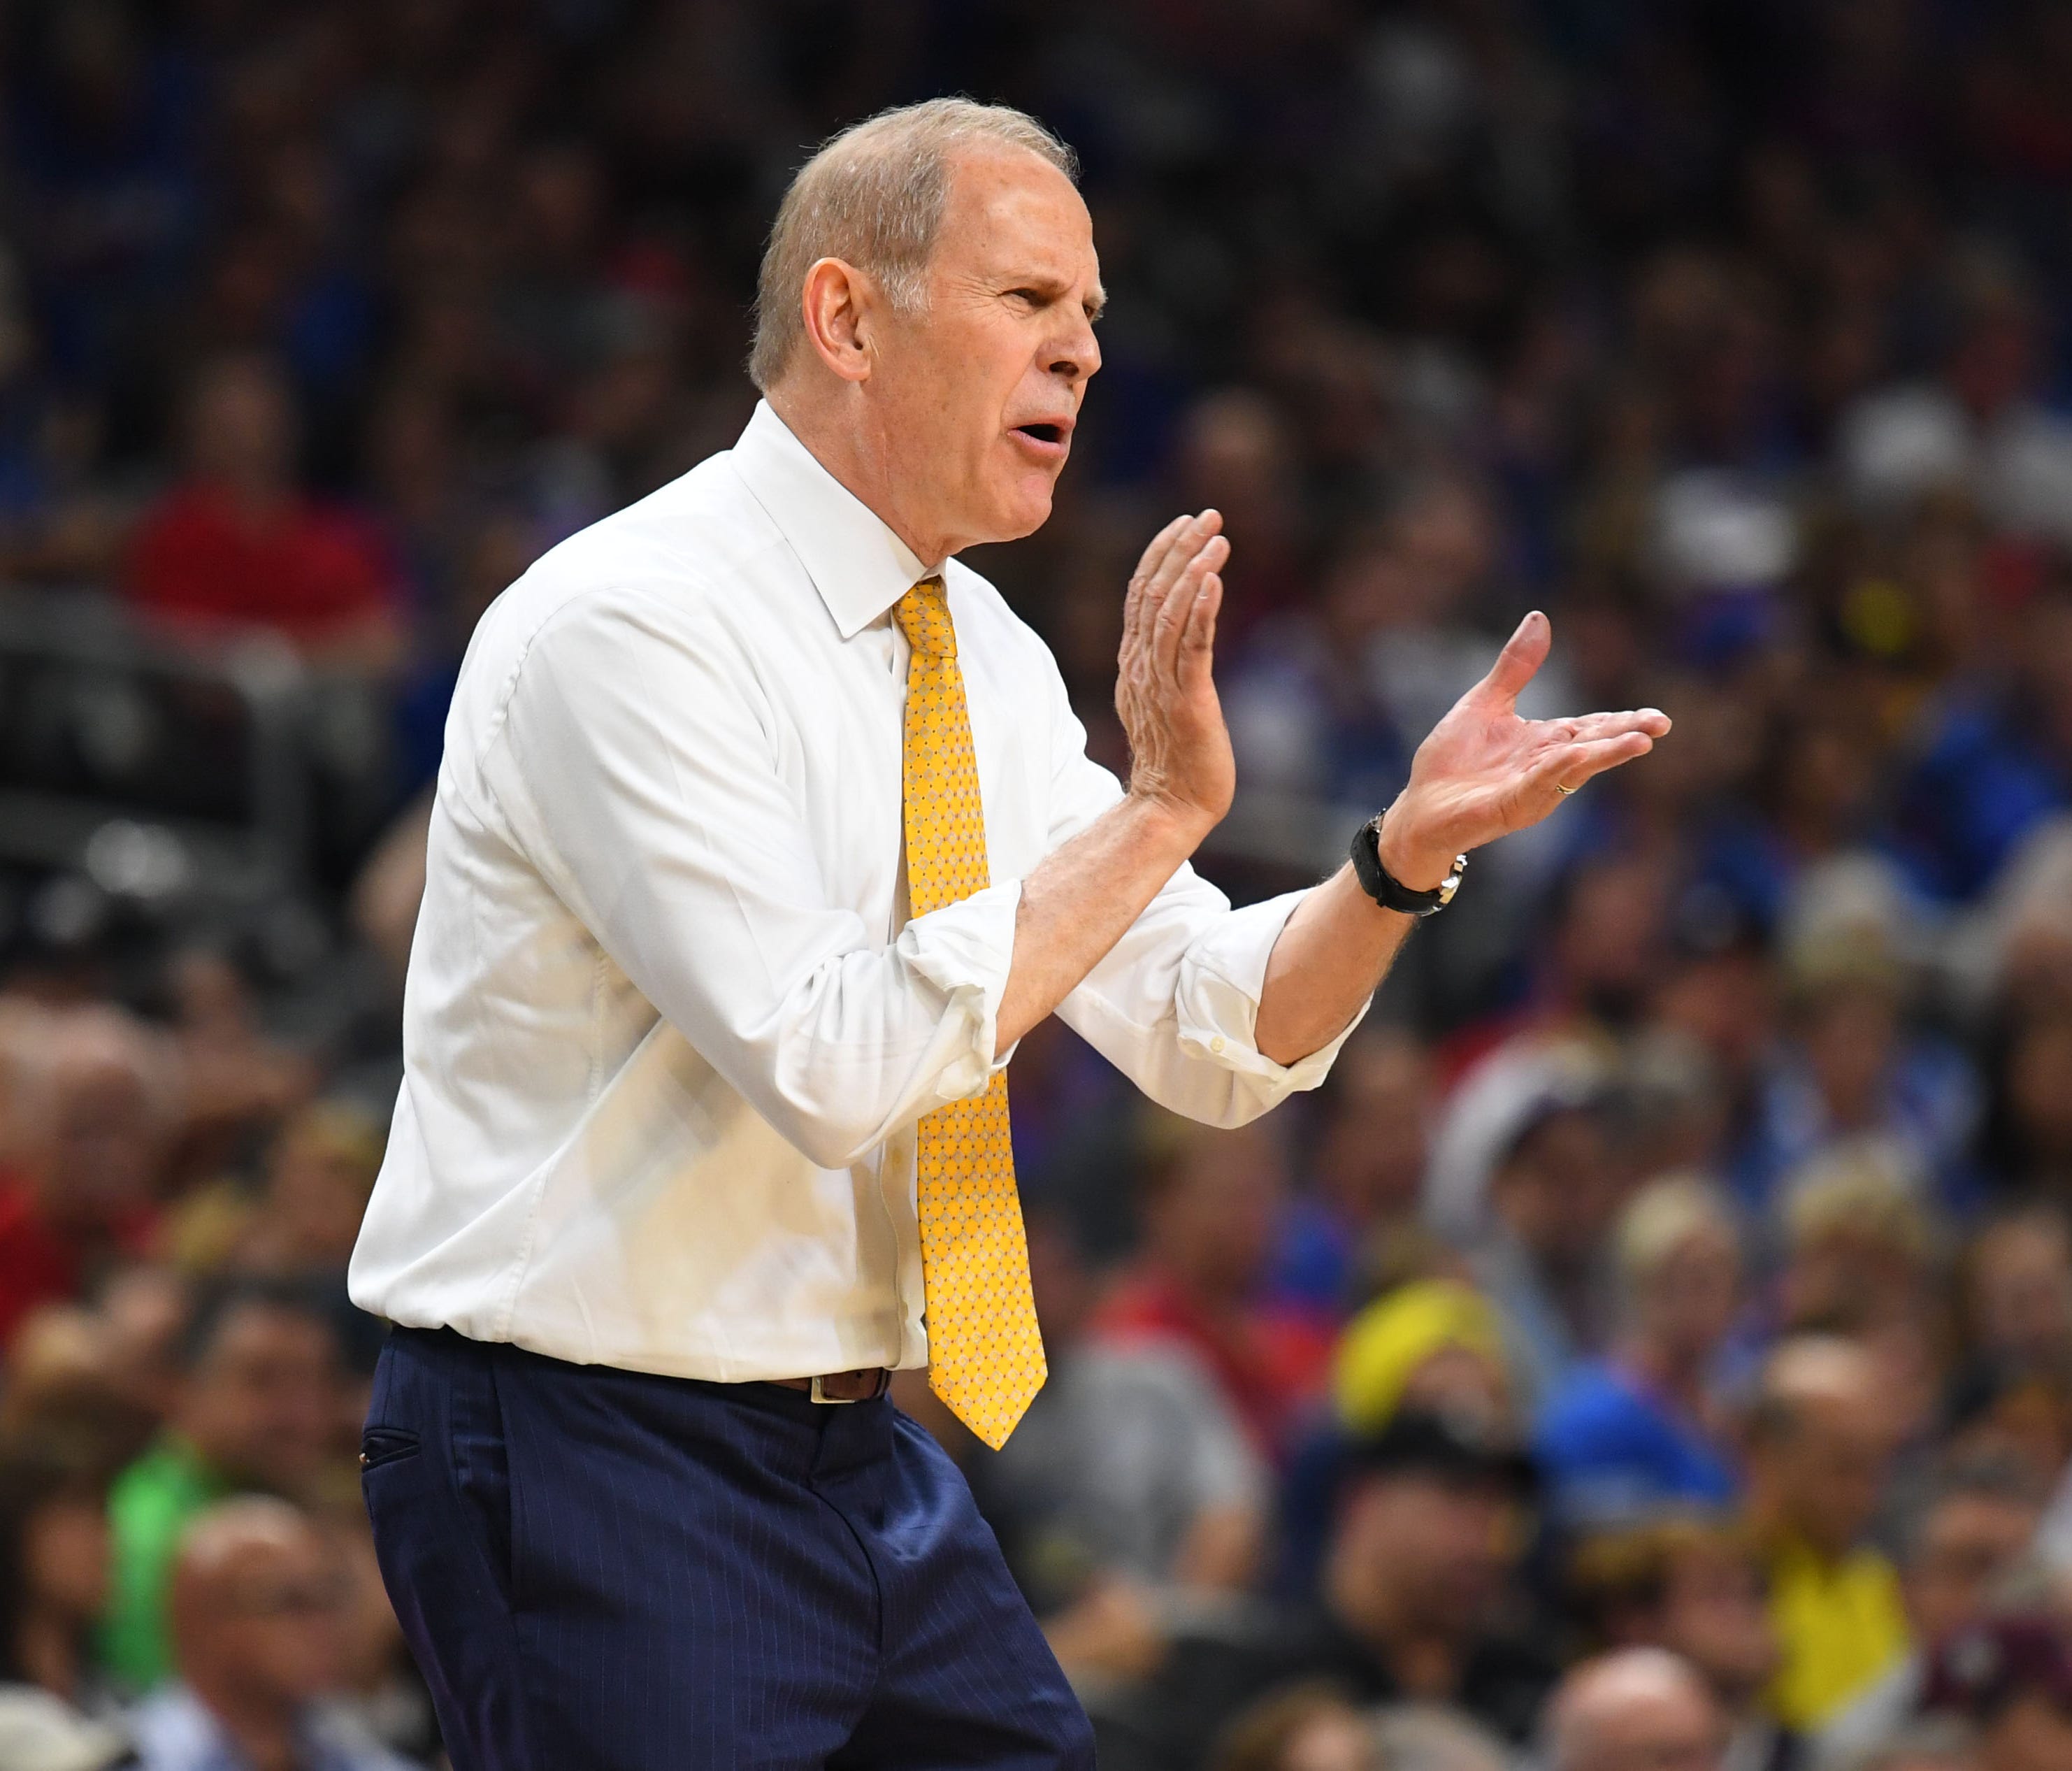 Michigan Wolverines head coach John Beilein, age 65. Interviewed with Pistons on May 31. Has 541-318 record as college head coach in 26 seasons.